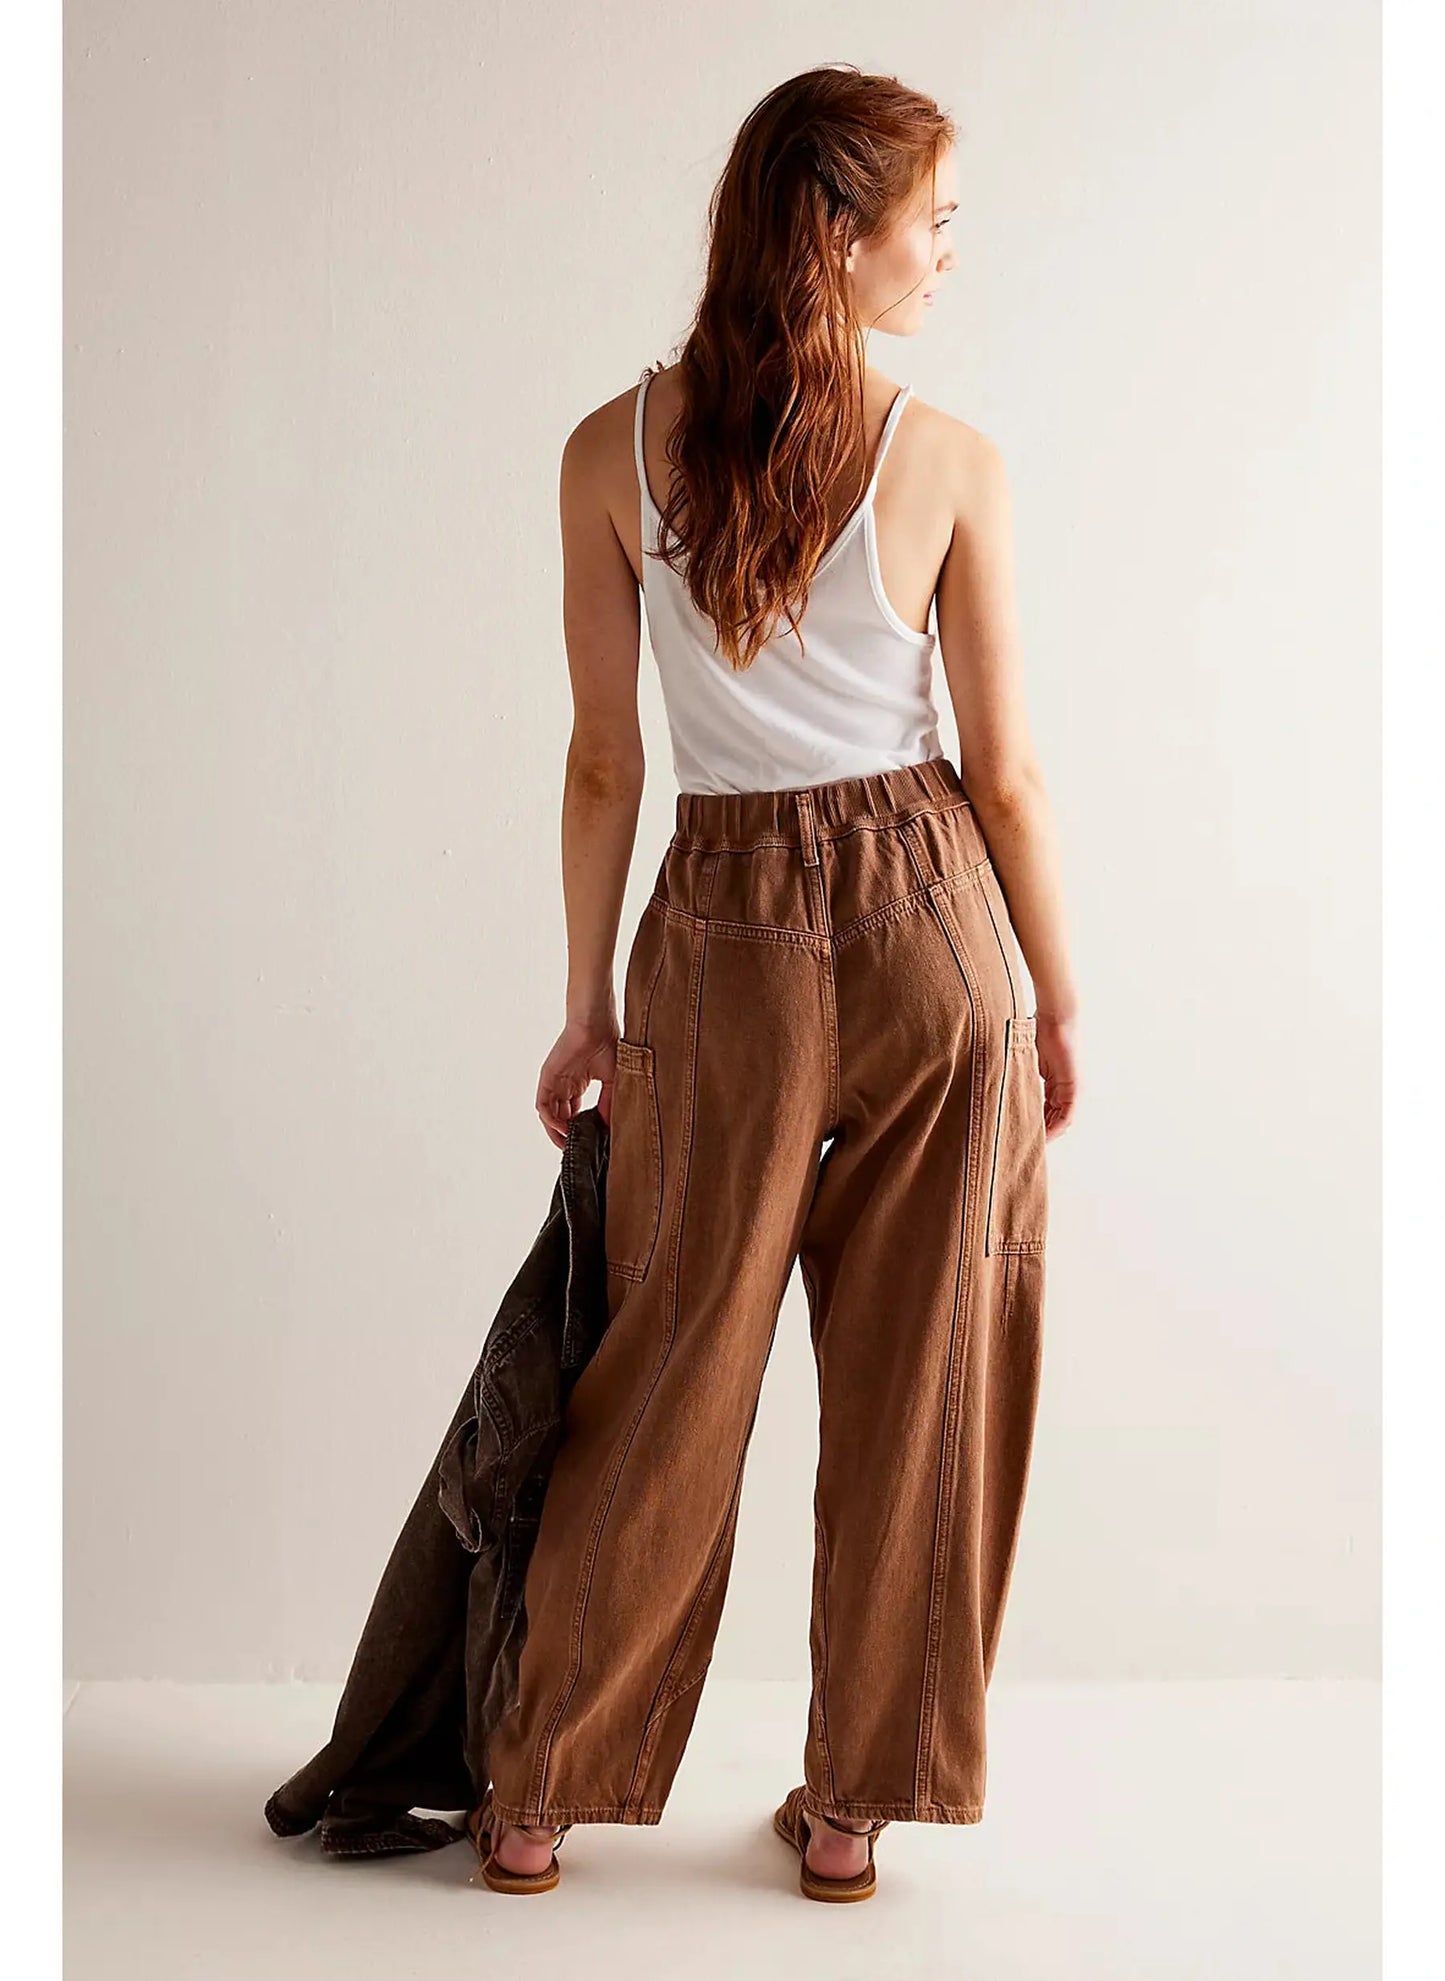 New School Relaxed Jeans - Warm Brown